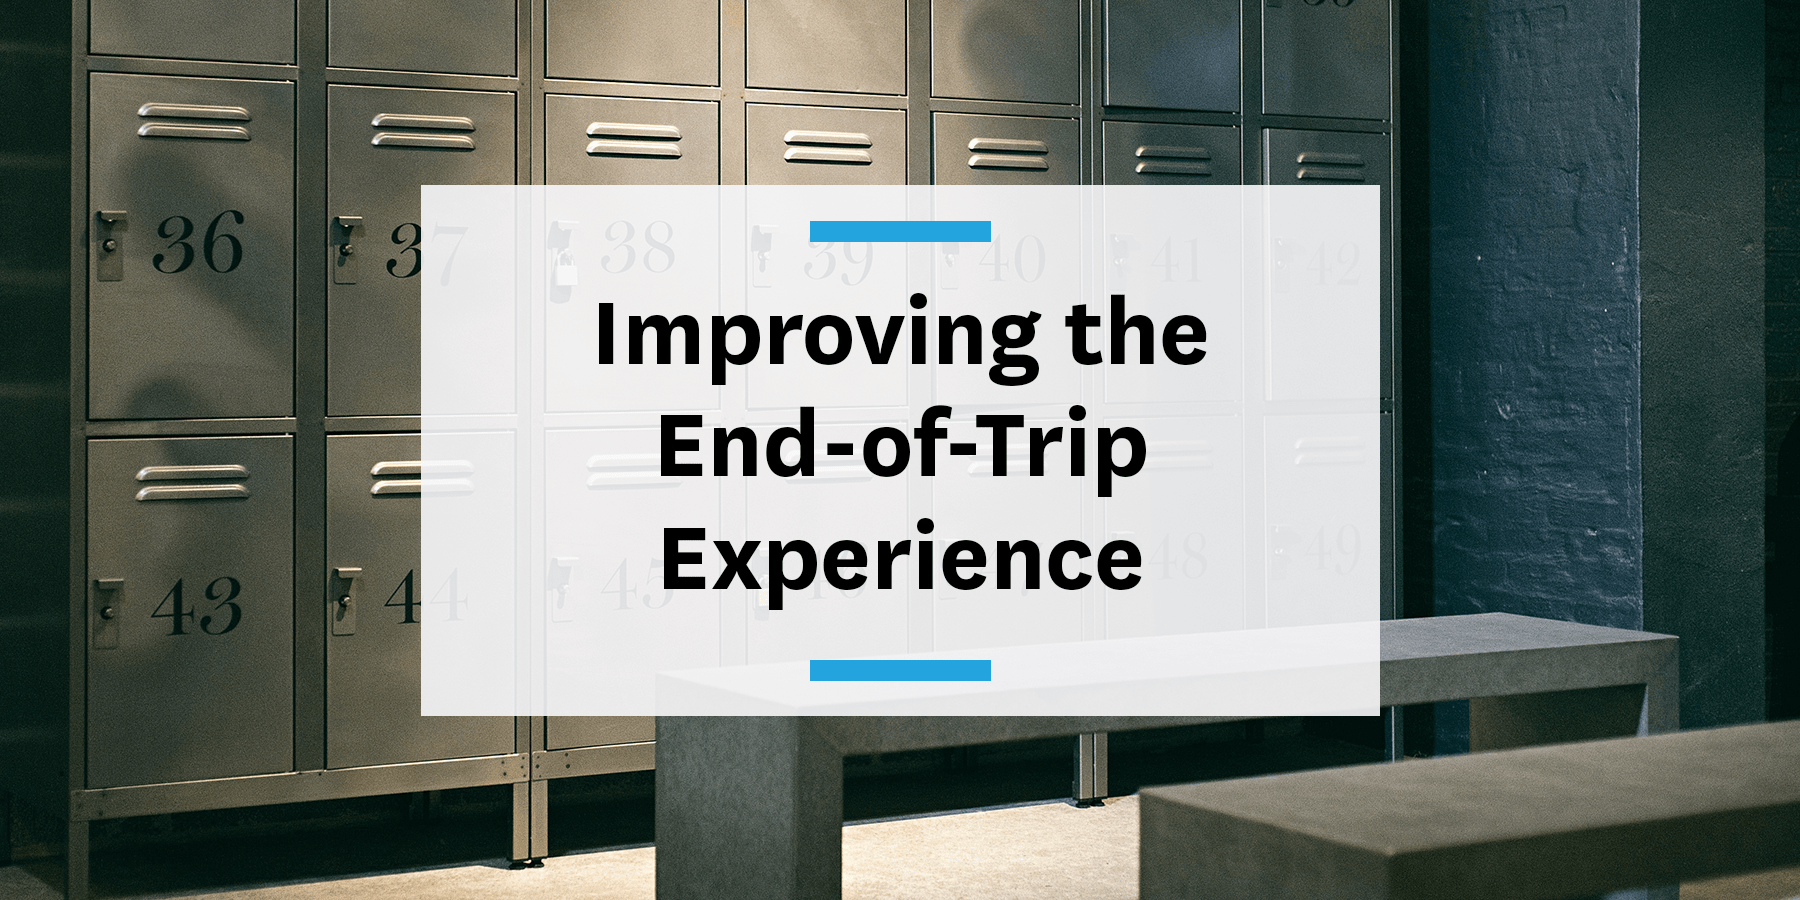 Feature image for improving the end-of-trip employee experience